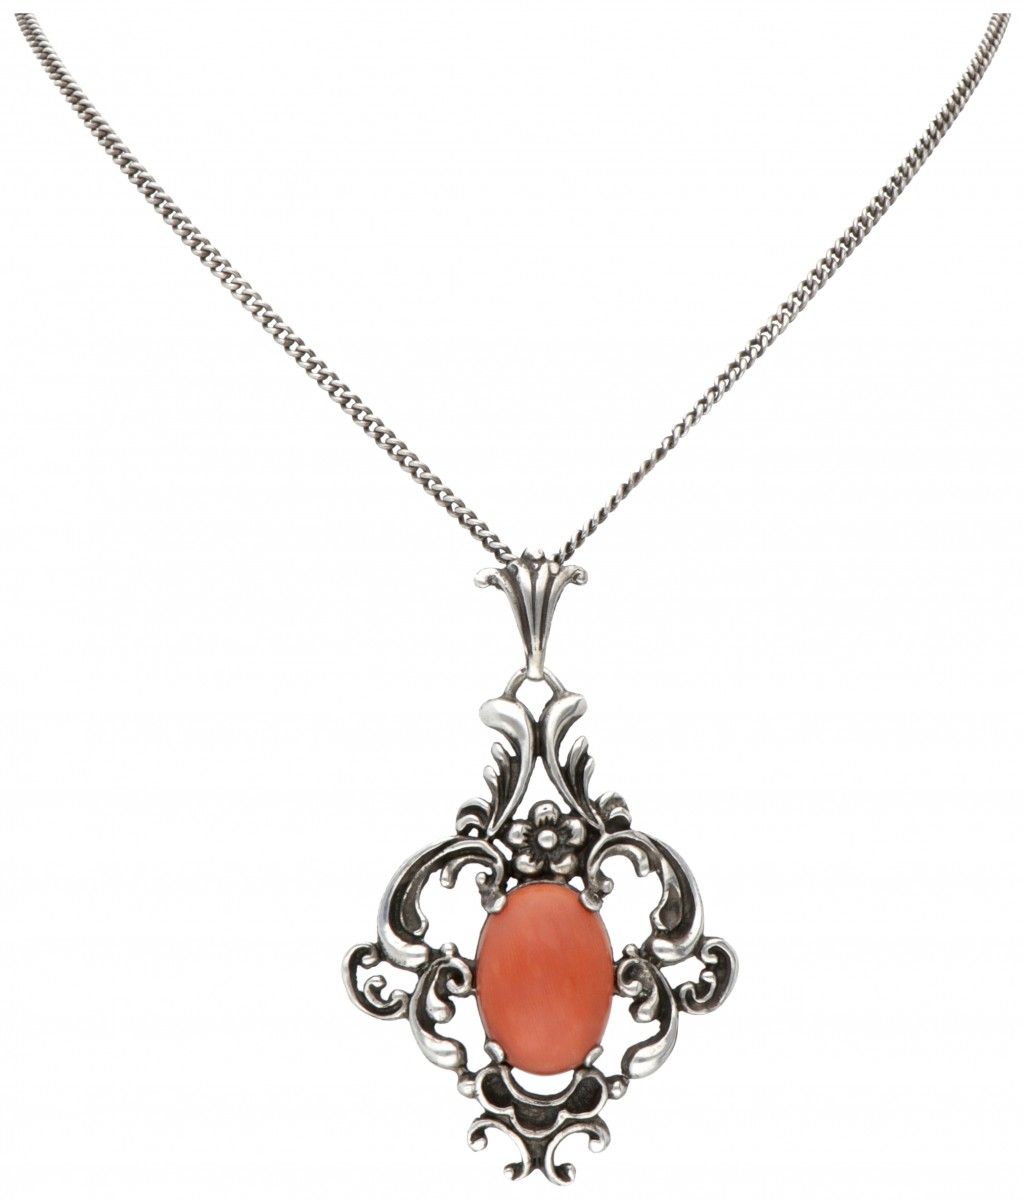 Silver necklace with pendant set with approx. 7.29 ct. Red coral - 835/1000. Sel&hellip;